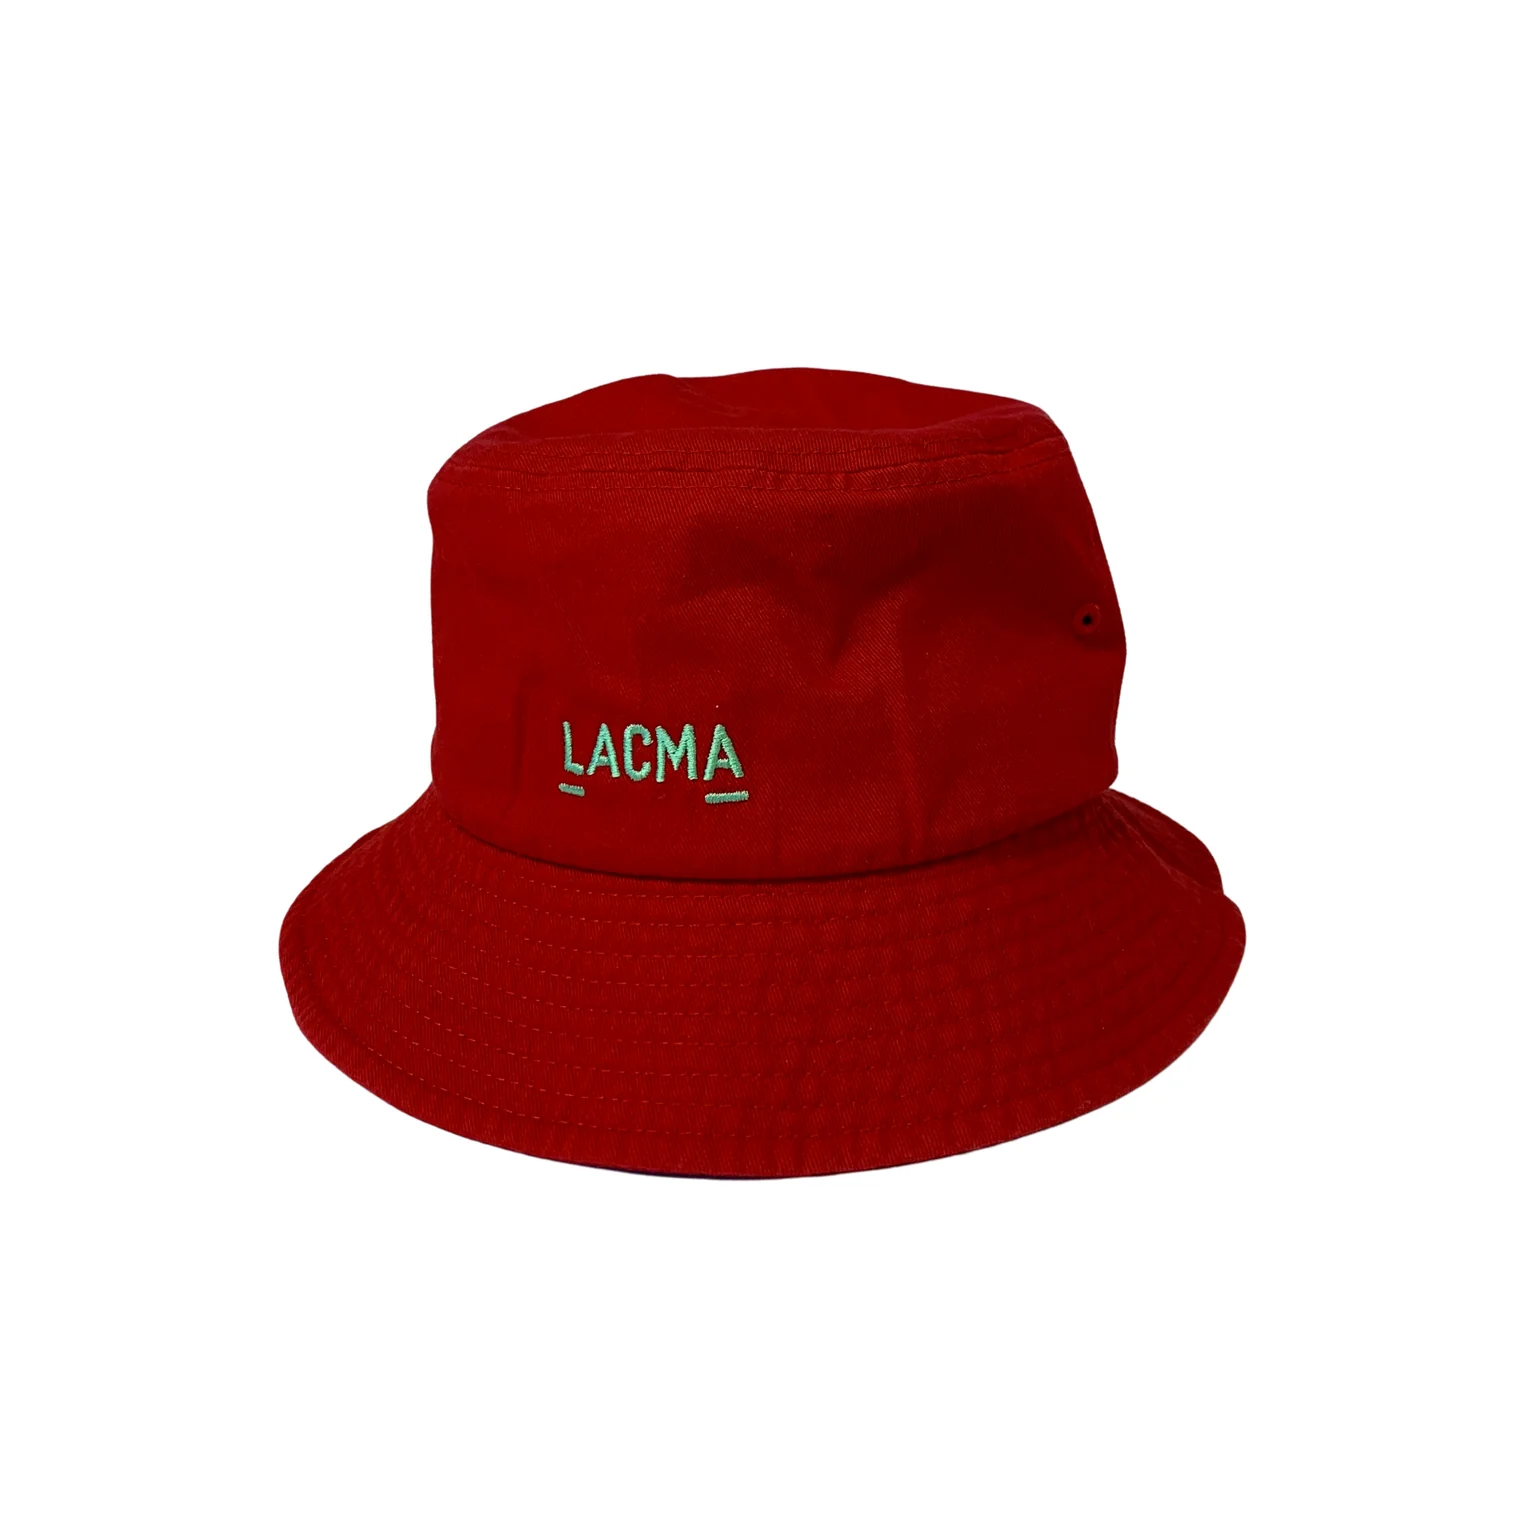 Red hat with green embroidery on front that says Los Angeles County Museum of Art